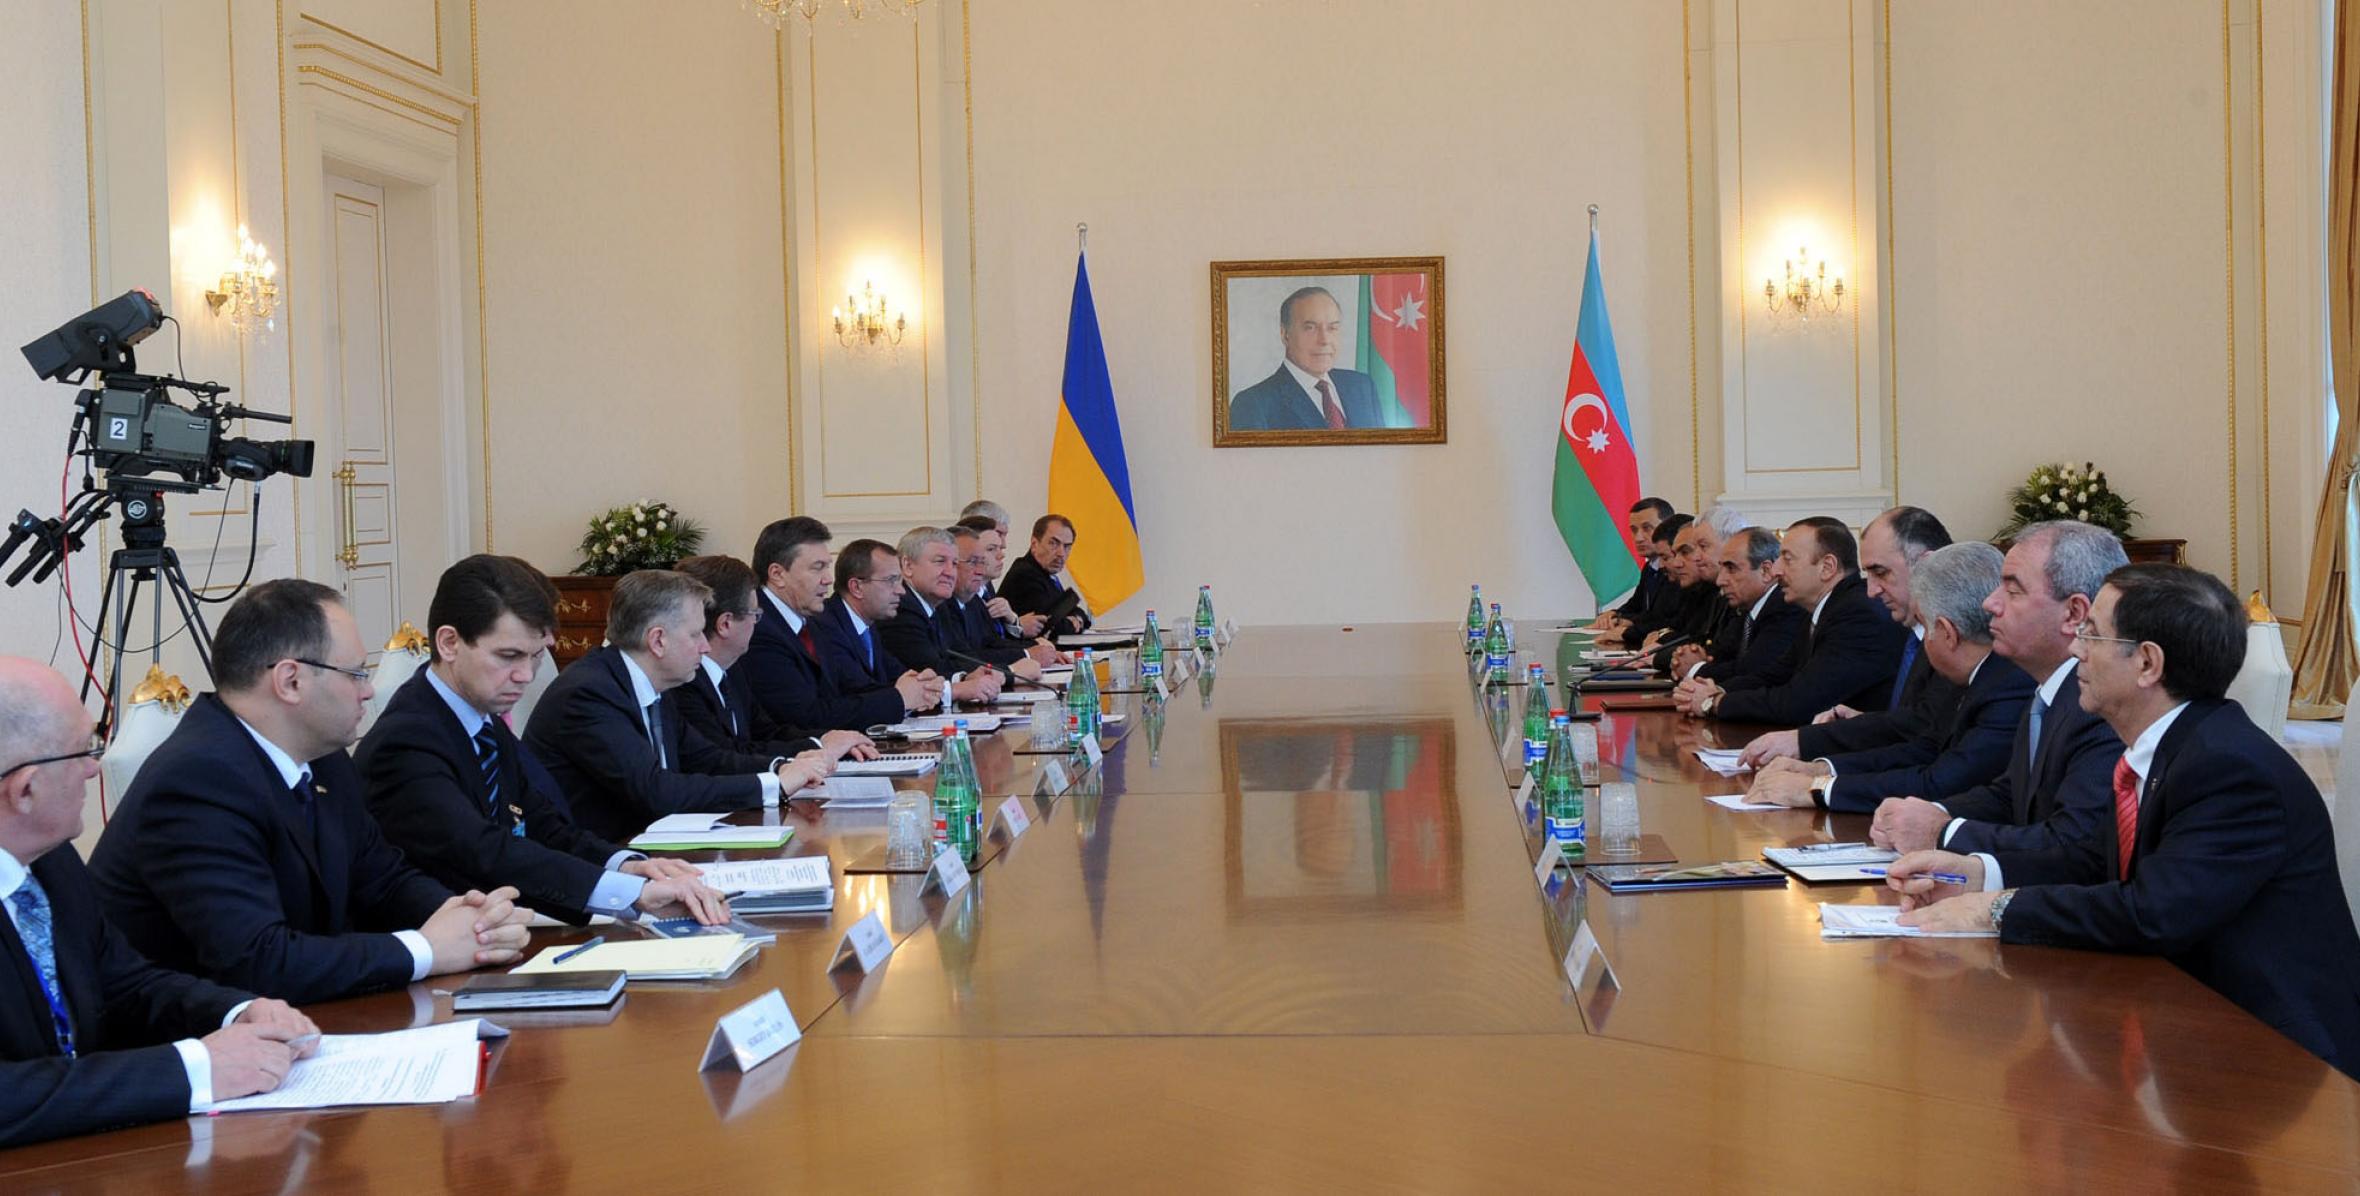 Third session of the Council of Presidents of Azerbaijan and Ukraine